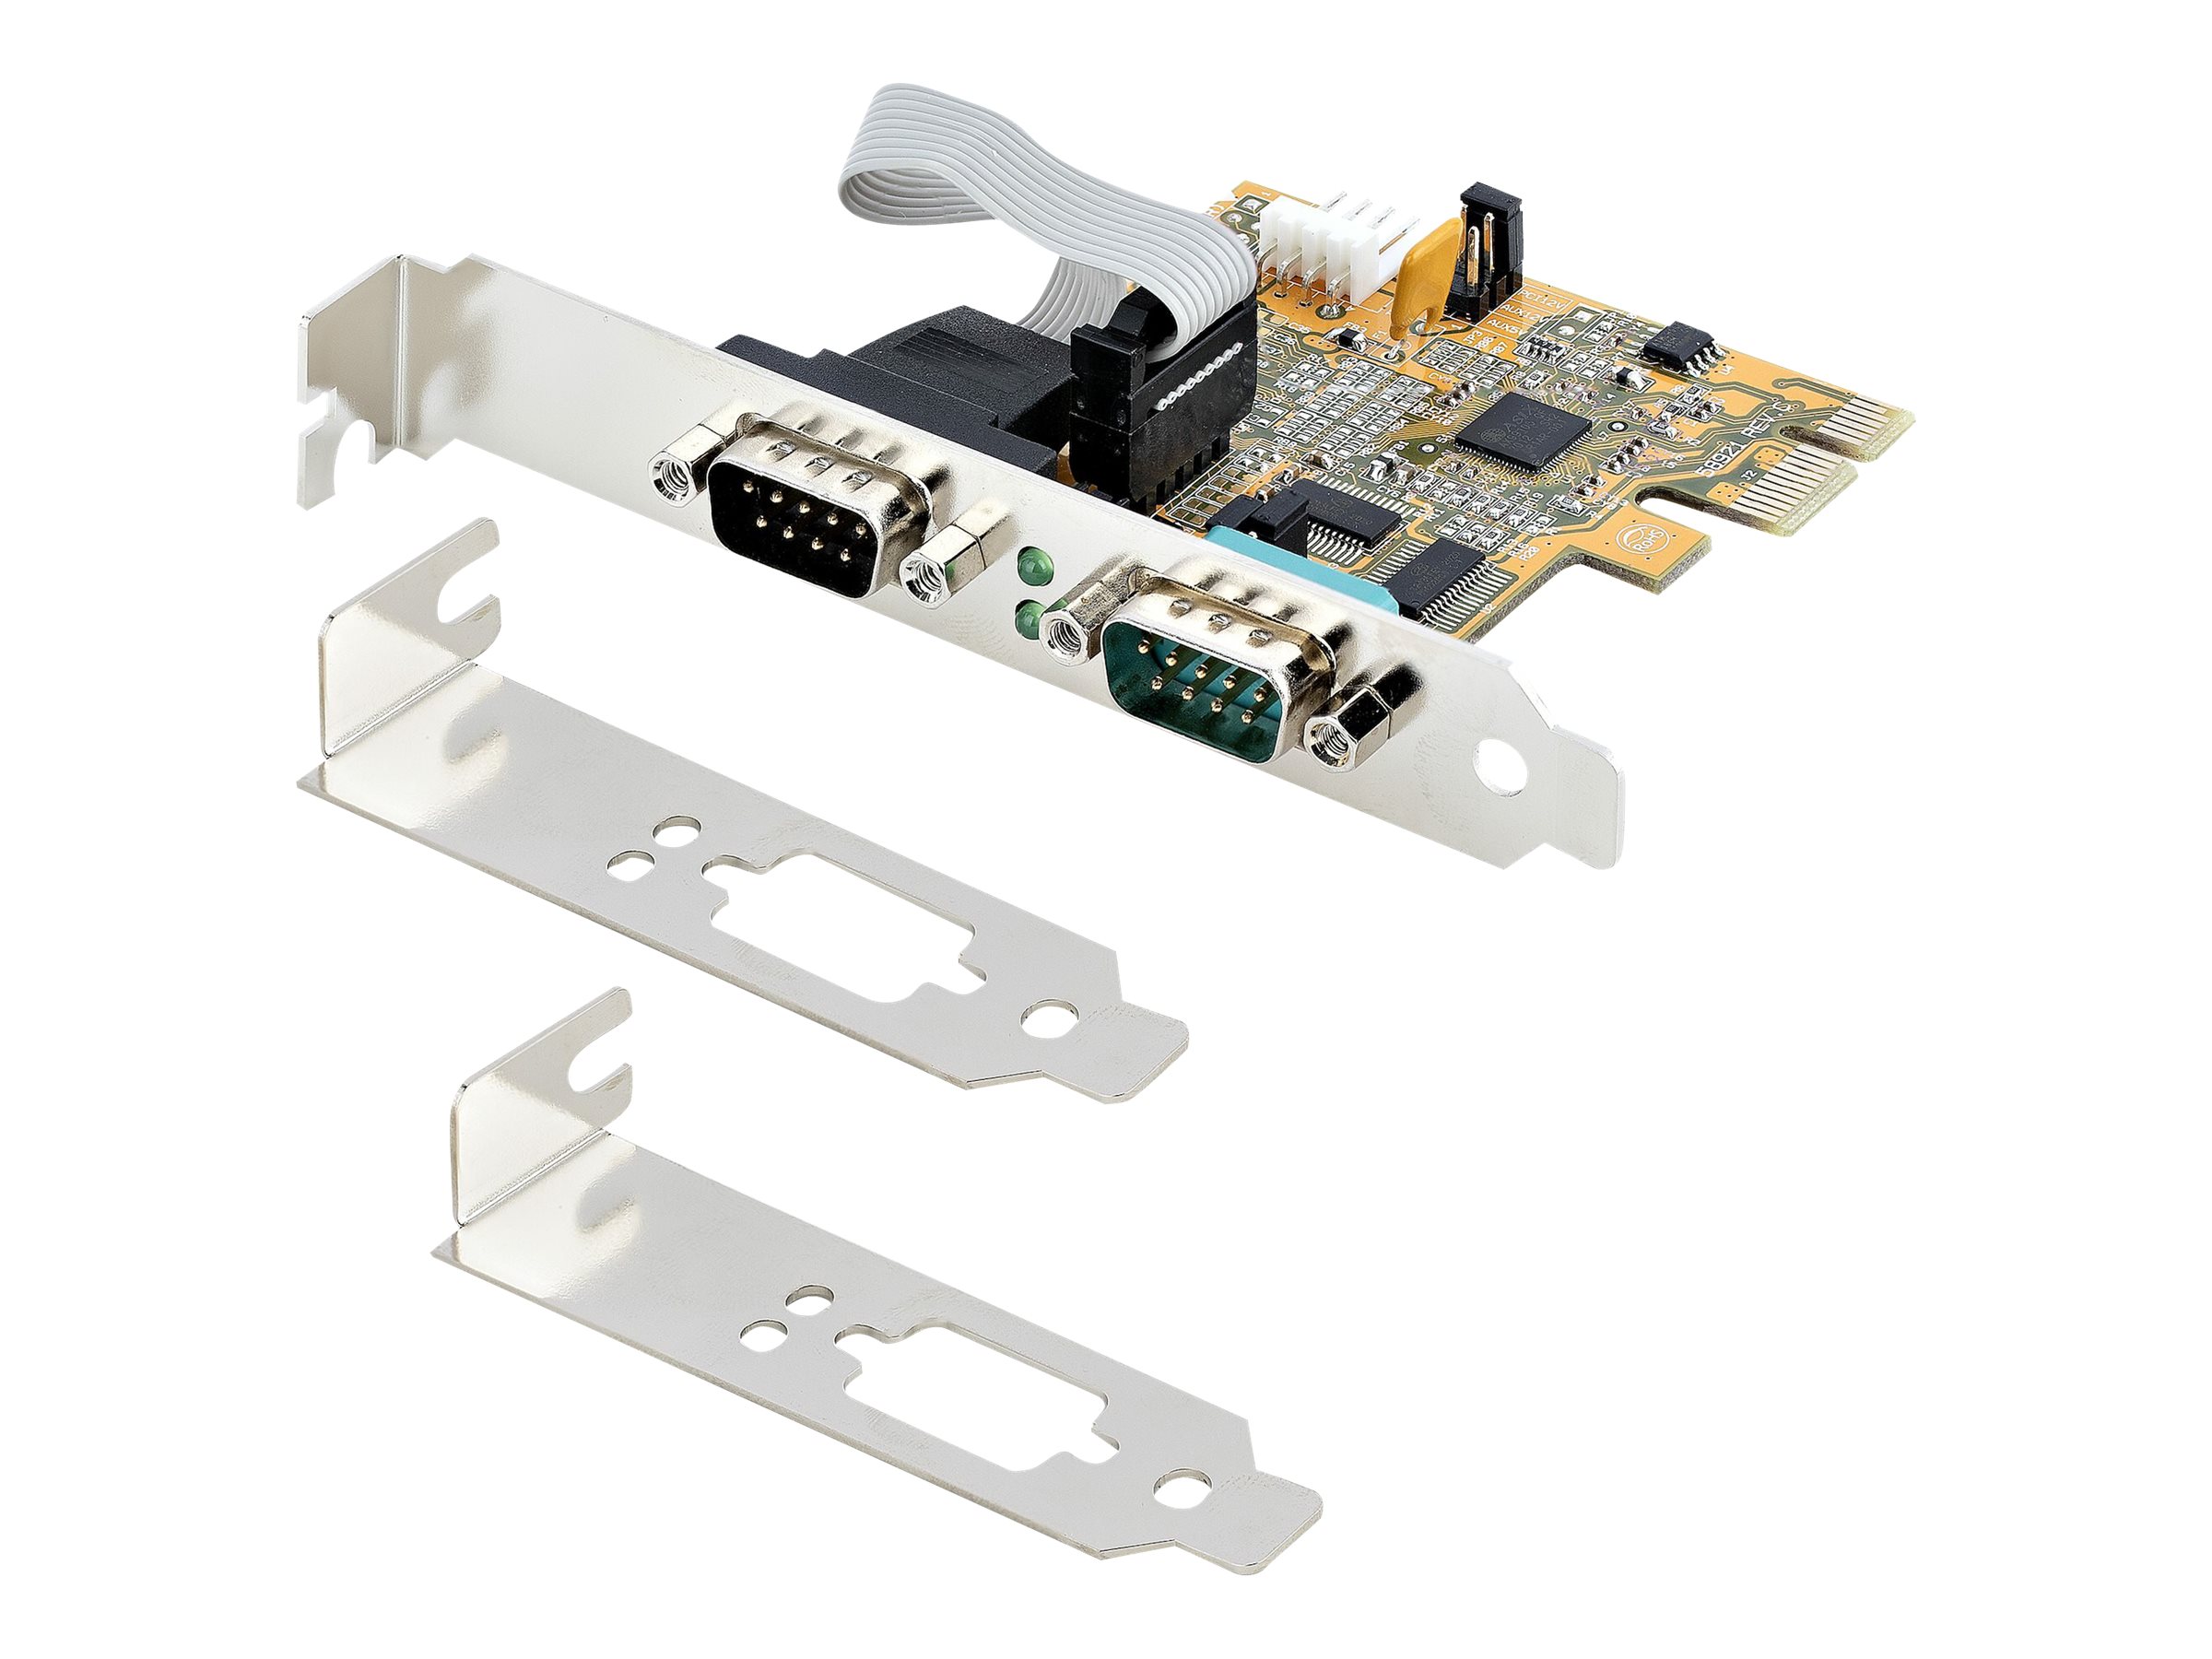 StarTech.com 2-Port PCI Express Serial Card, Dual Port PCIe to RS232 (DB9) Serial Interface Card, 16C1050 UART, Standard or Low Profile Brackets, COM Retention, For Windows & Linux - PCIe to Dual DB9 Card (21050-PC-SERIAL-CARD) - Serieller Adapter - ...